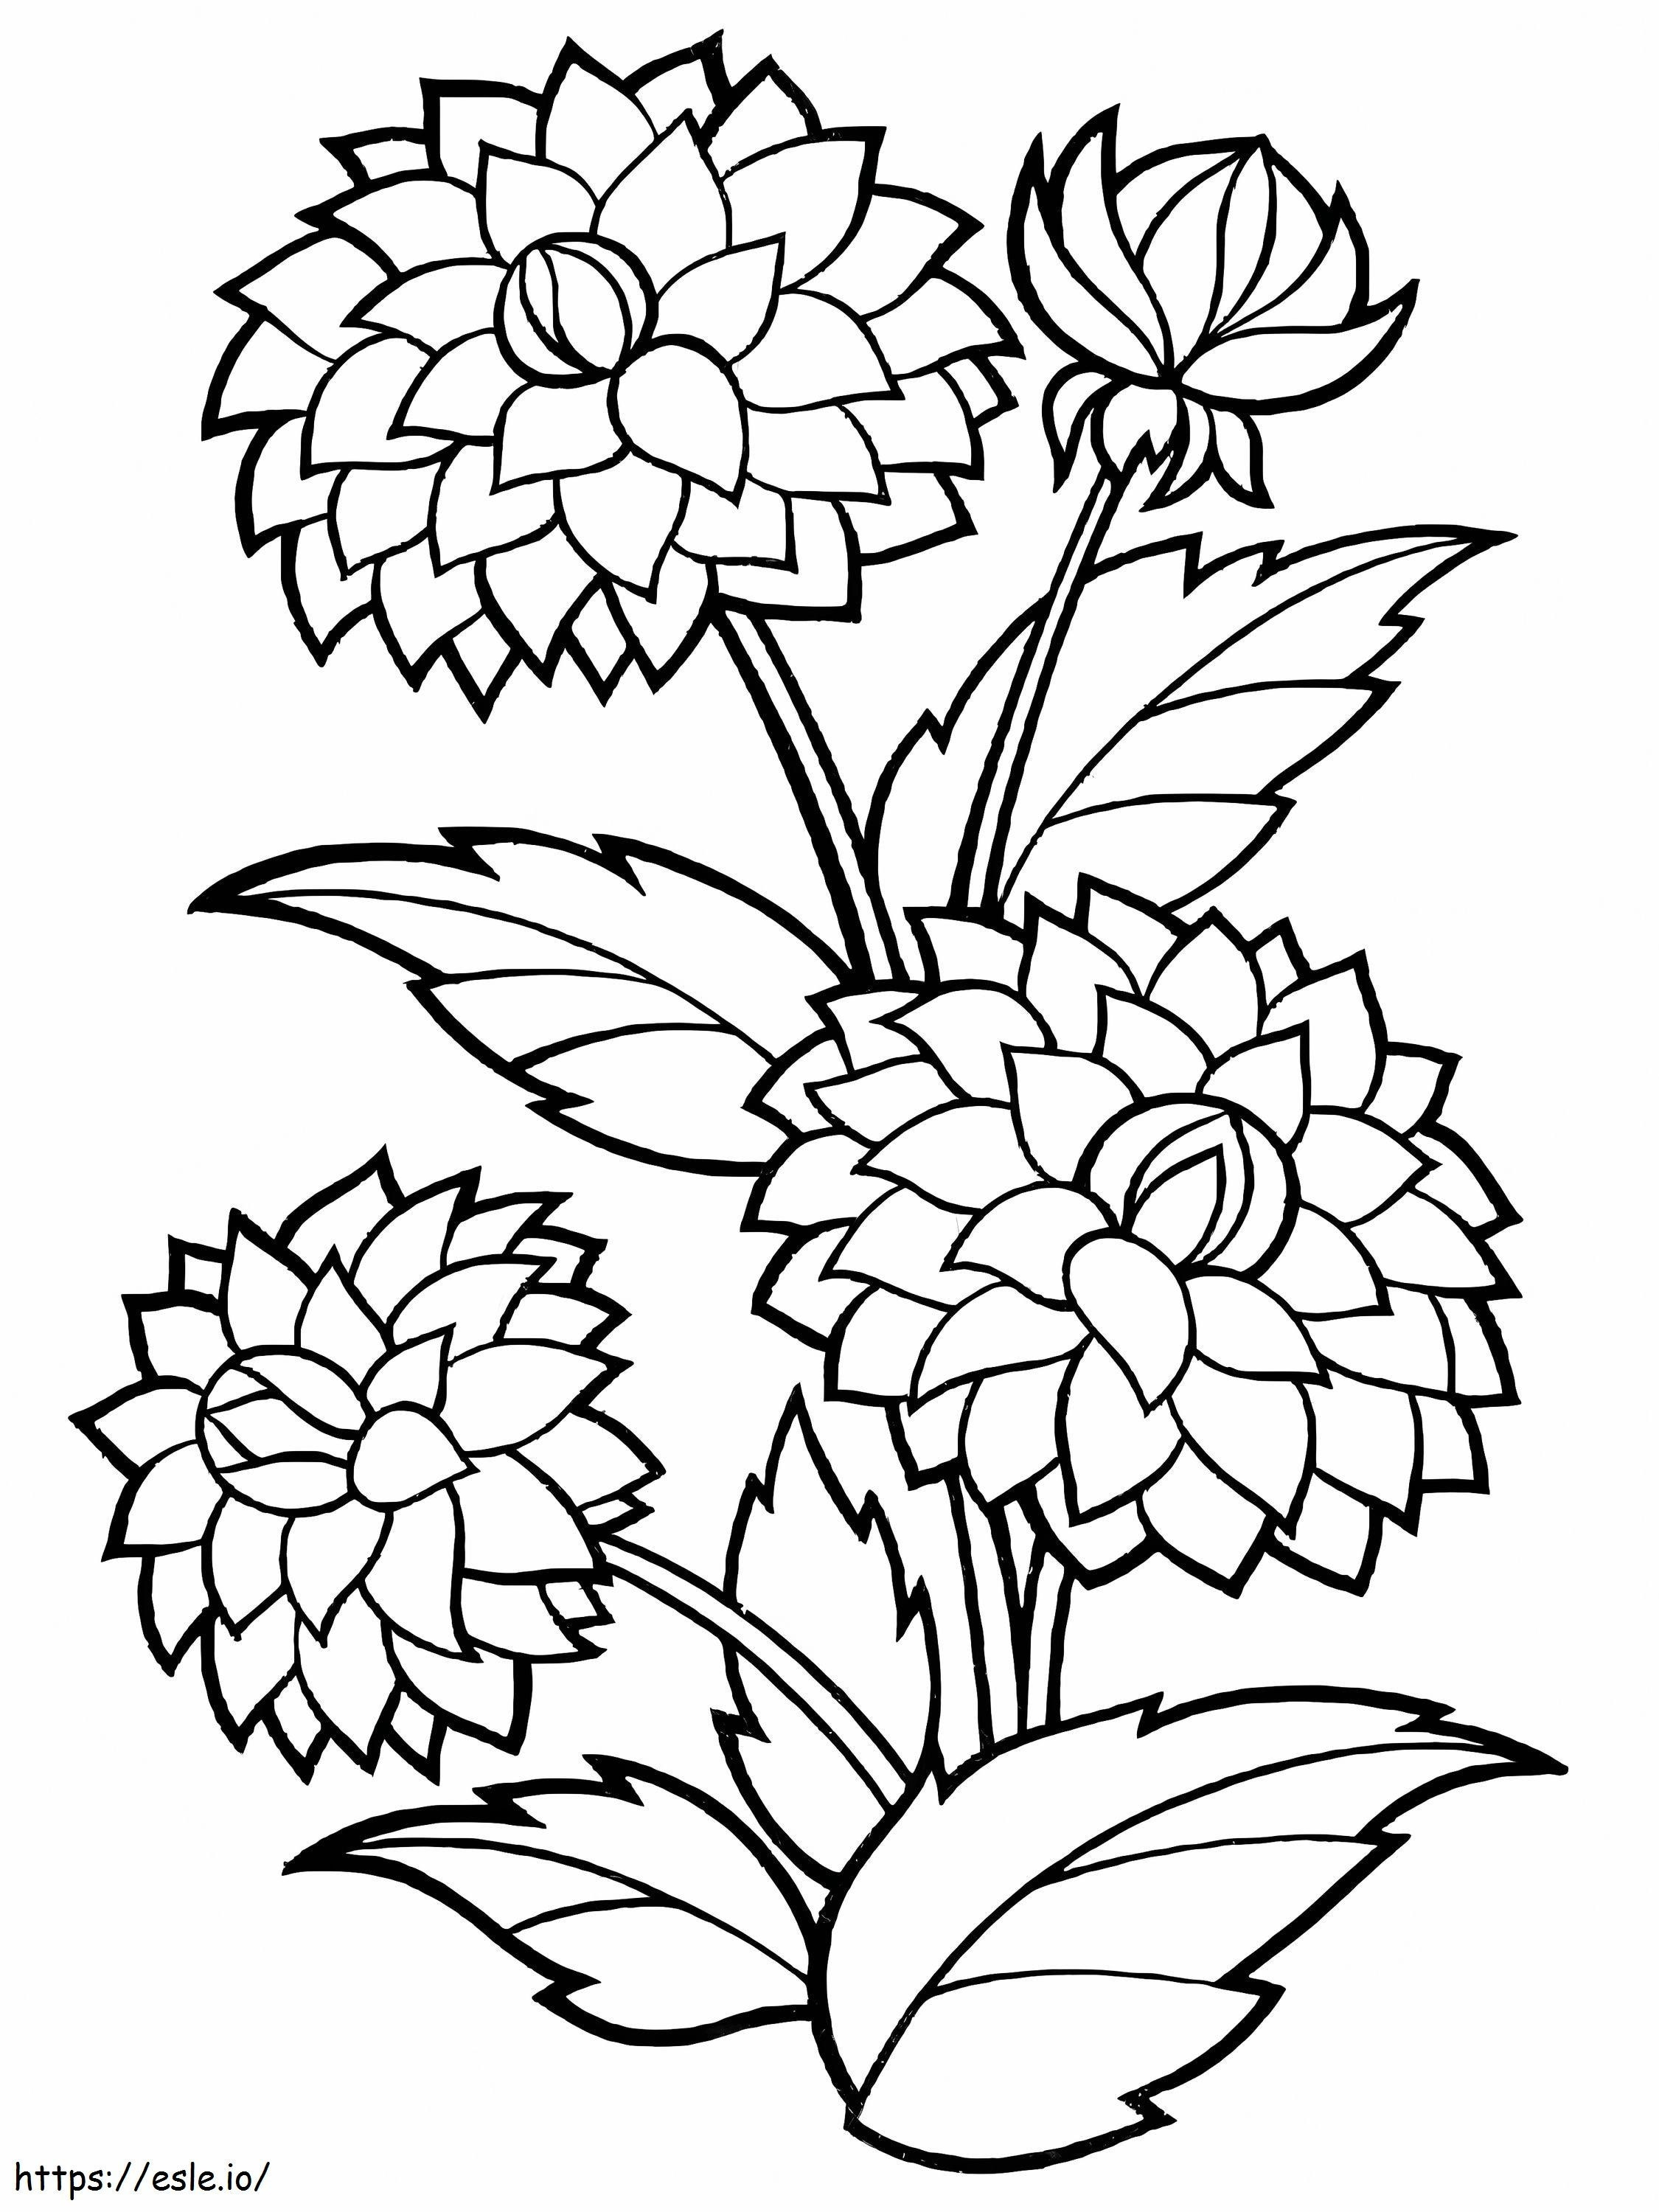 Dahlia Flowers To Print coloring page